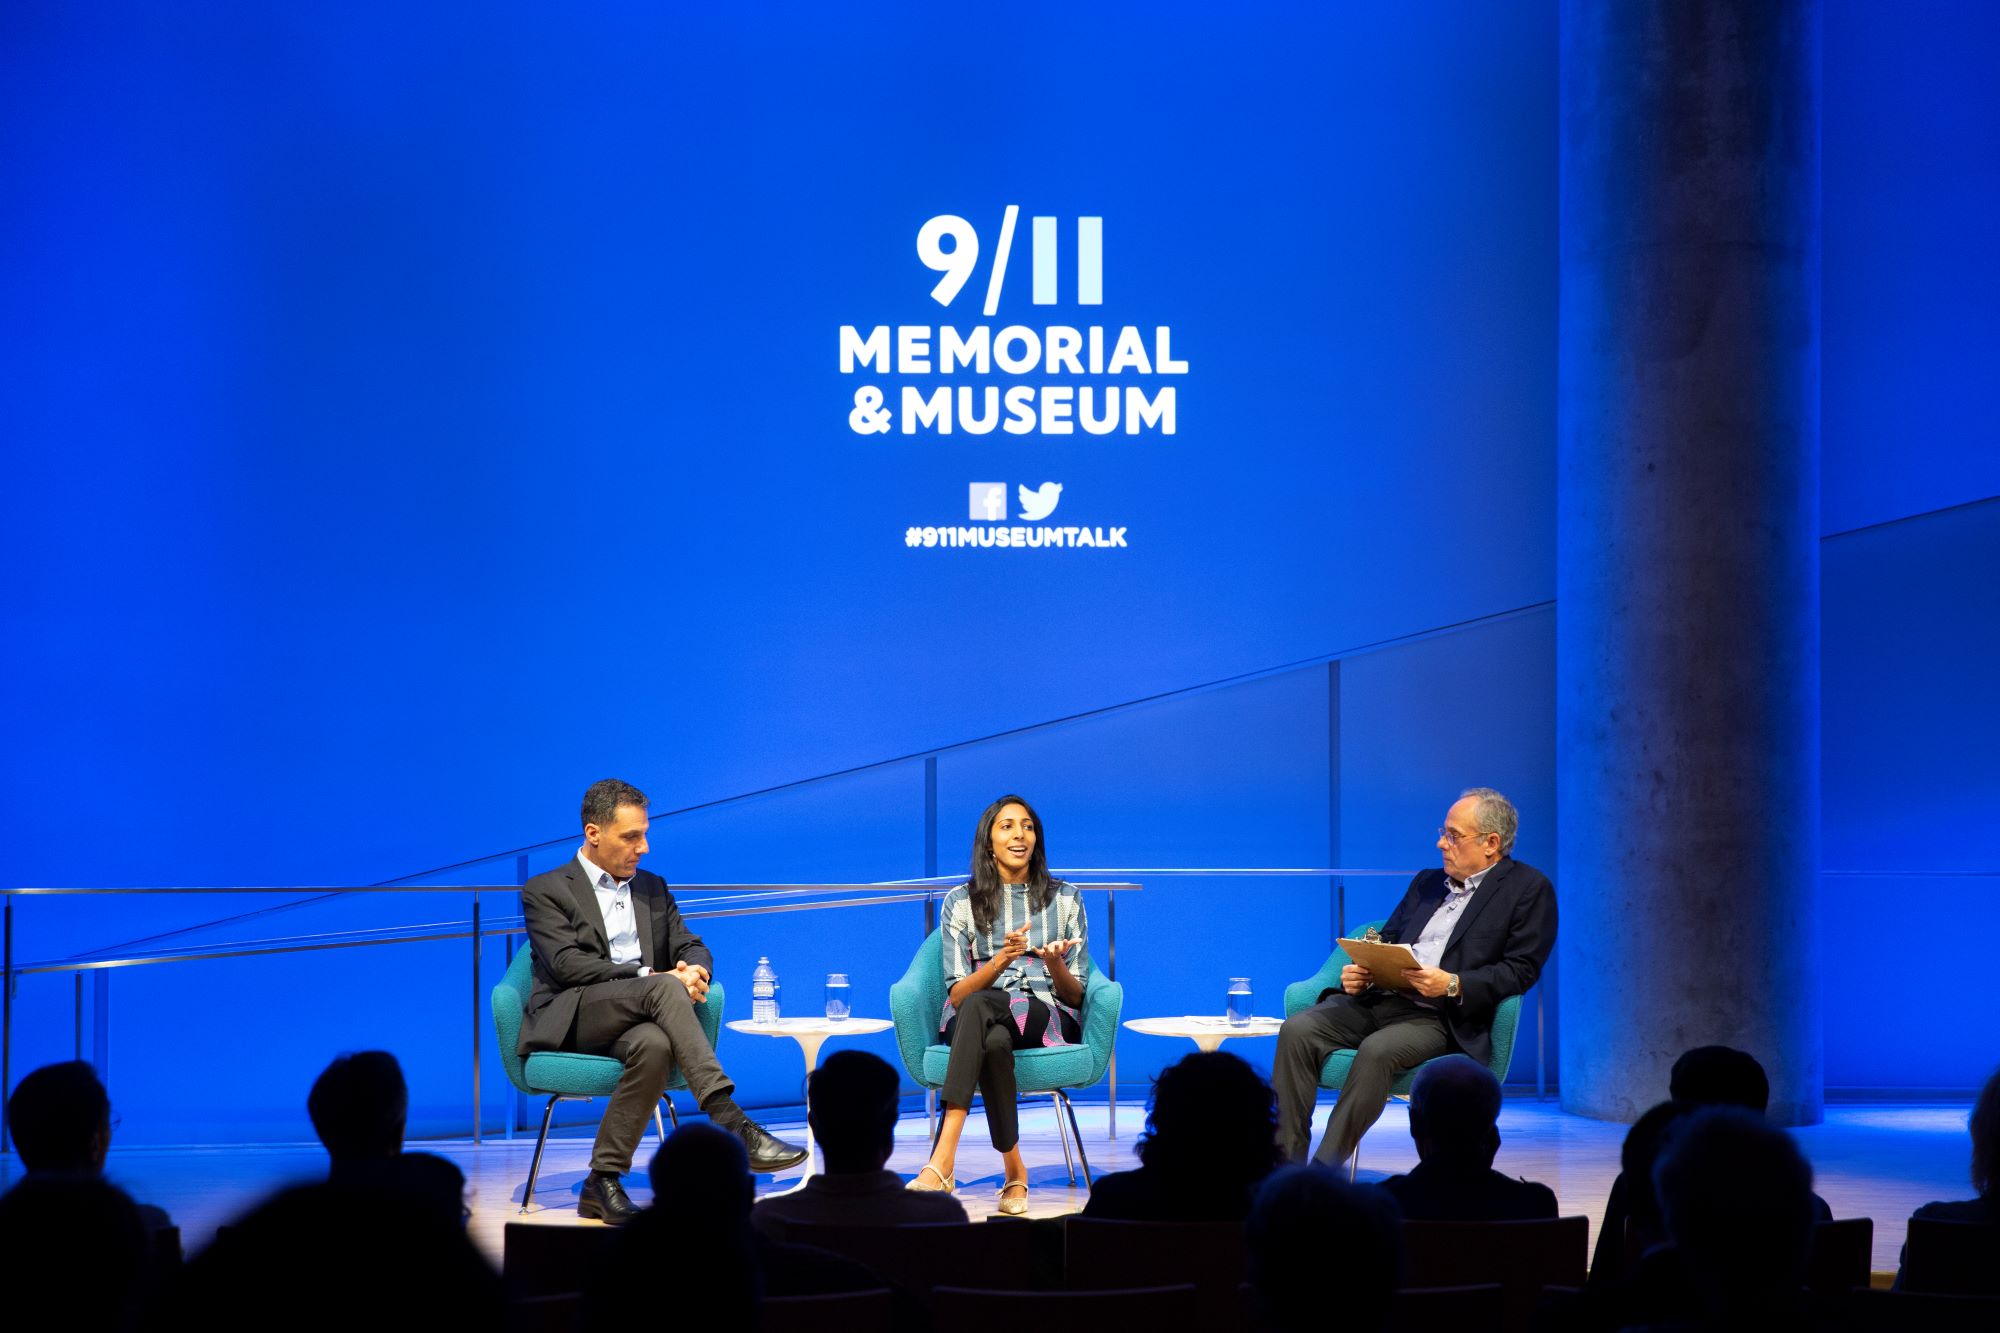 Hany Farid, Dartmouth computer science professor and senior advisor to the Counter Extremism Project, and Vidhya Ramalingam, founder of Moonshot CVE, sit onstage during a public program in the Museum Auditorium. Clifford Chanin, the executive vice president and deputy director for museum programs, sits to the left of them holding a clipboard. Blue and white lights illuminate the stage and silhouette audience members in the foreground. The 9/11 Memorial & Museum logo is projected above them.